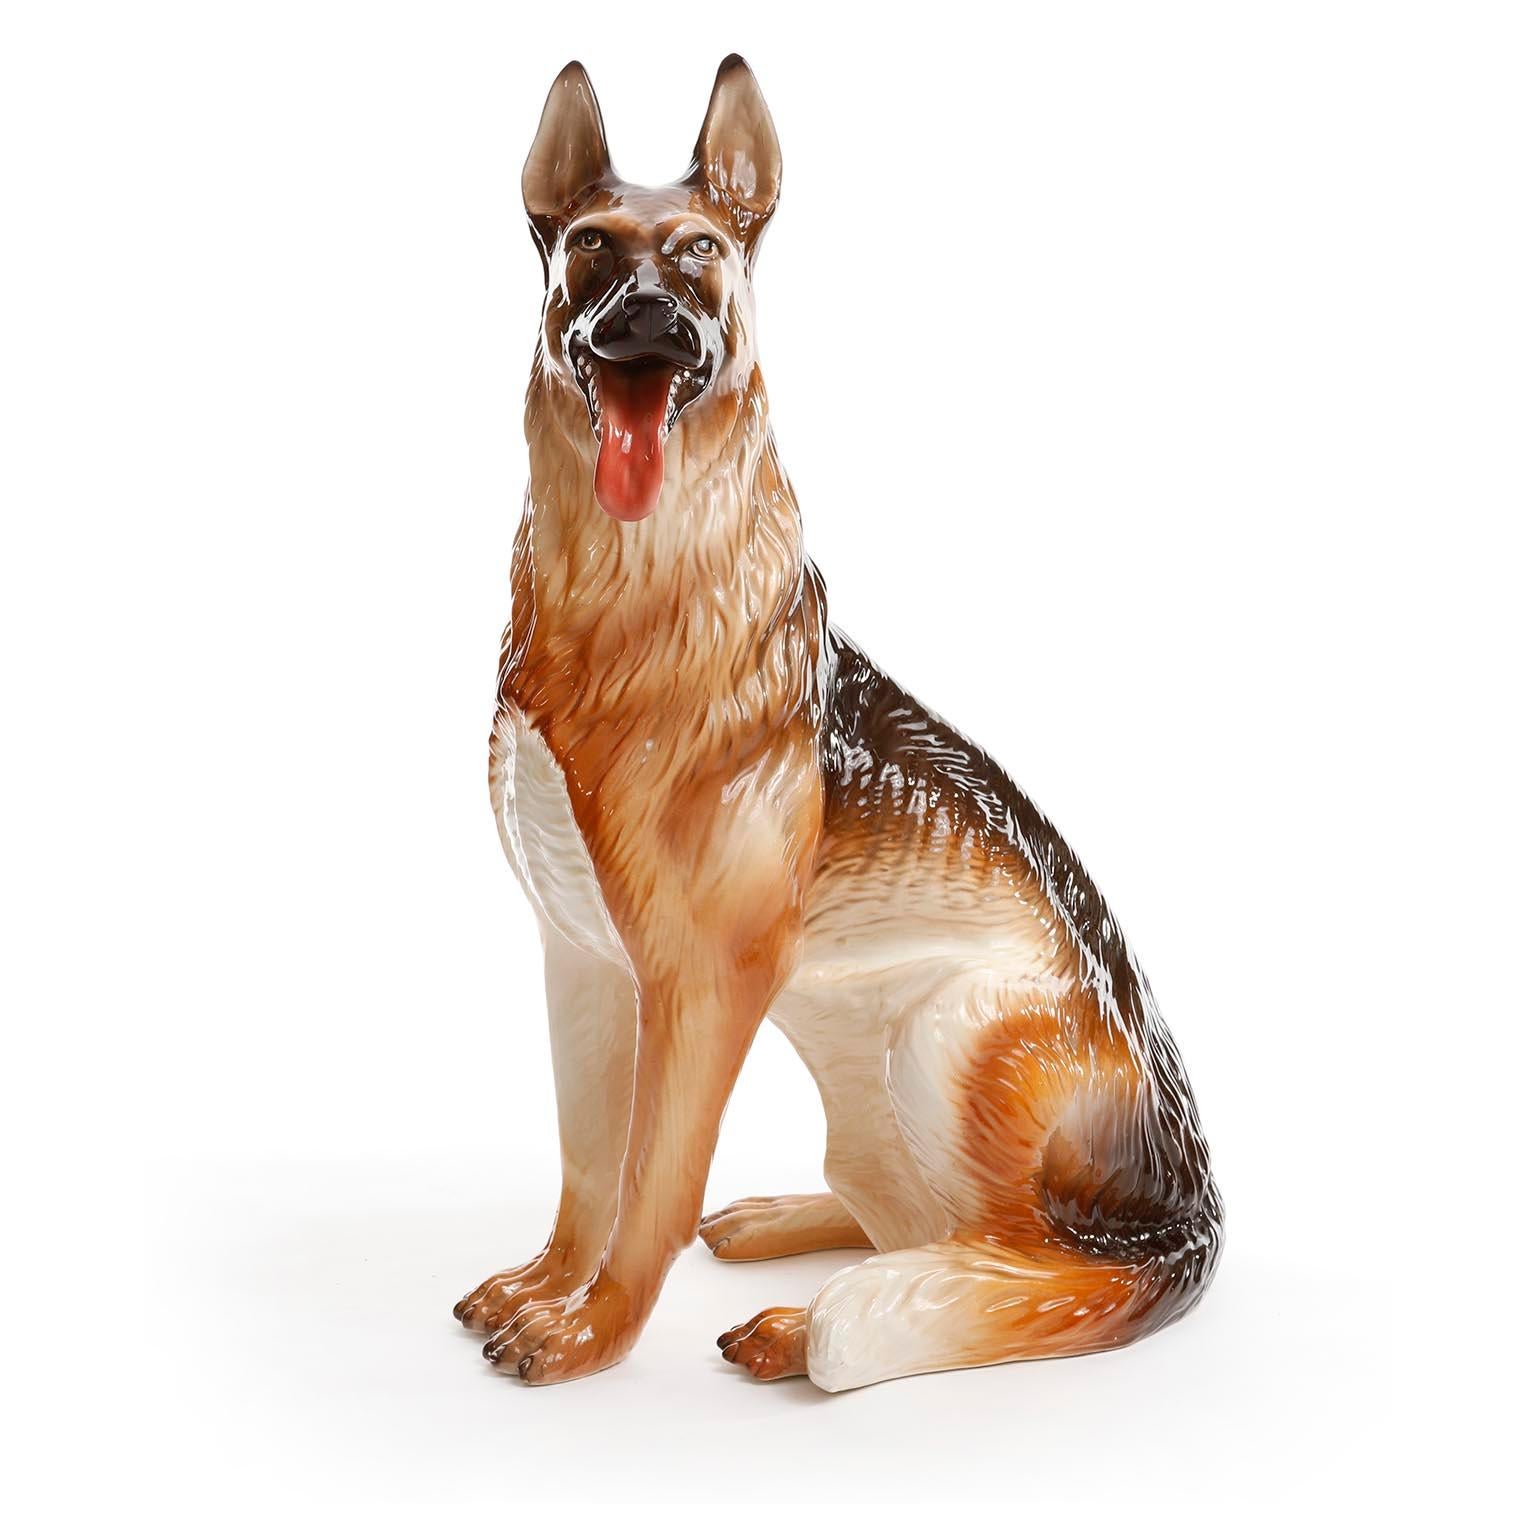 A painted and glazed ceramic life size German shepherd dog (german: Schäferhund) sculpture manufactured in Italy, circa 1960 (late 1950s or early 1960s).
A gorgeous piece with great details.
The white areas on the photos are reflections of the